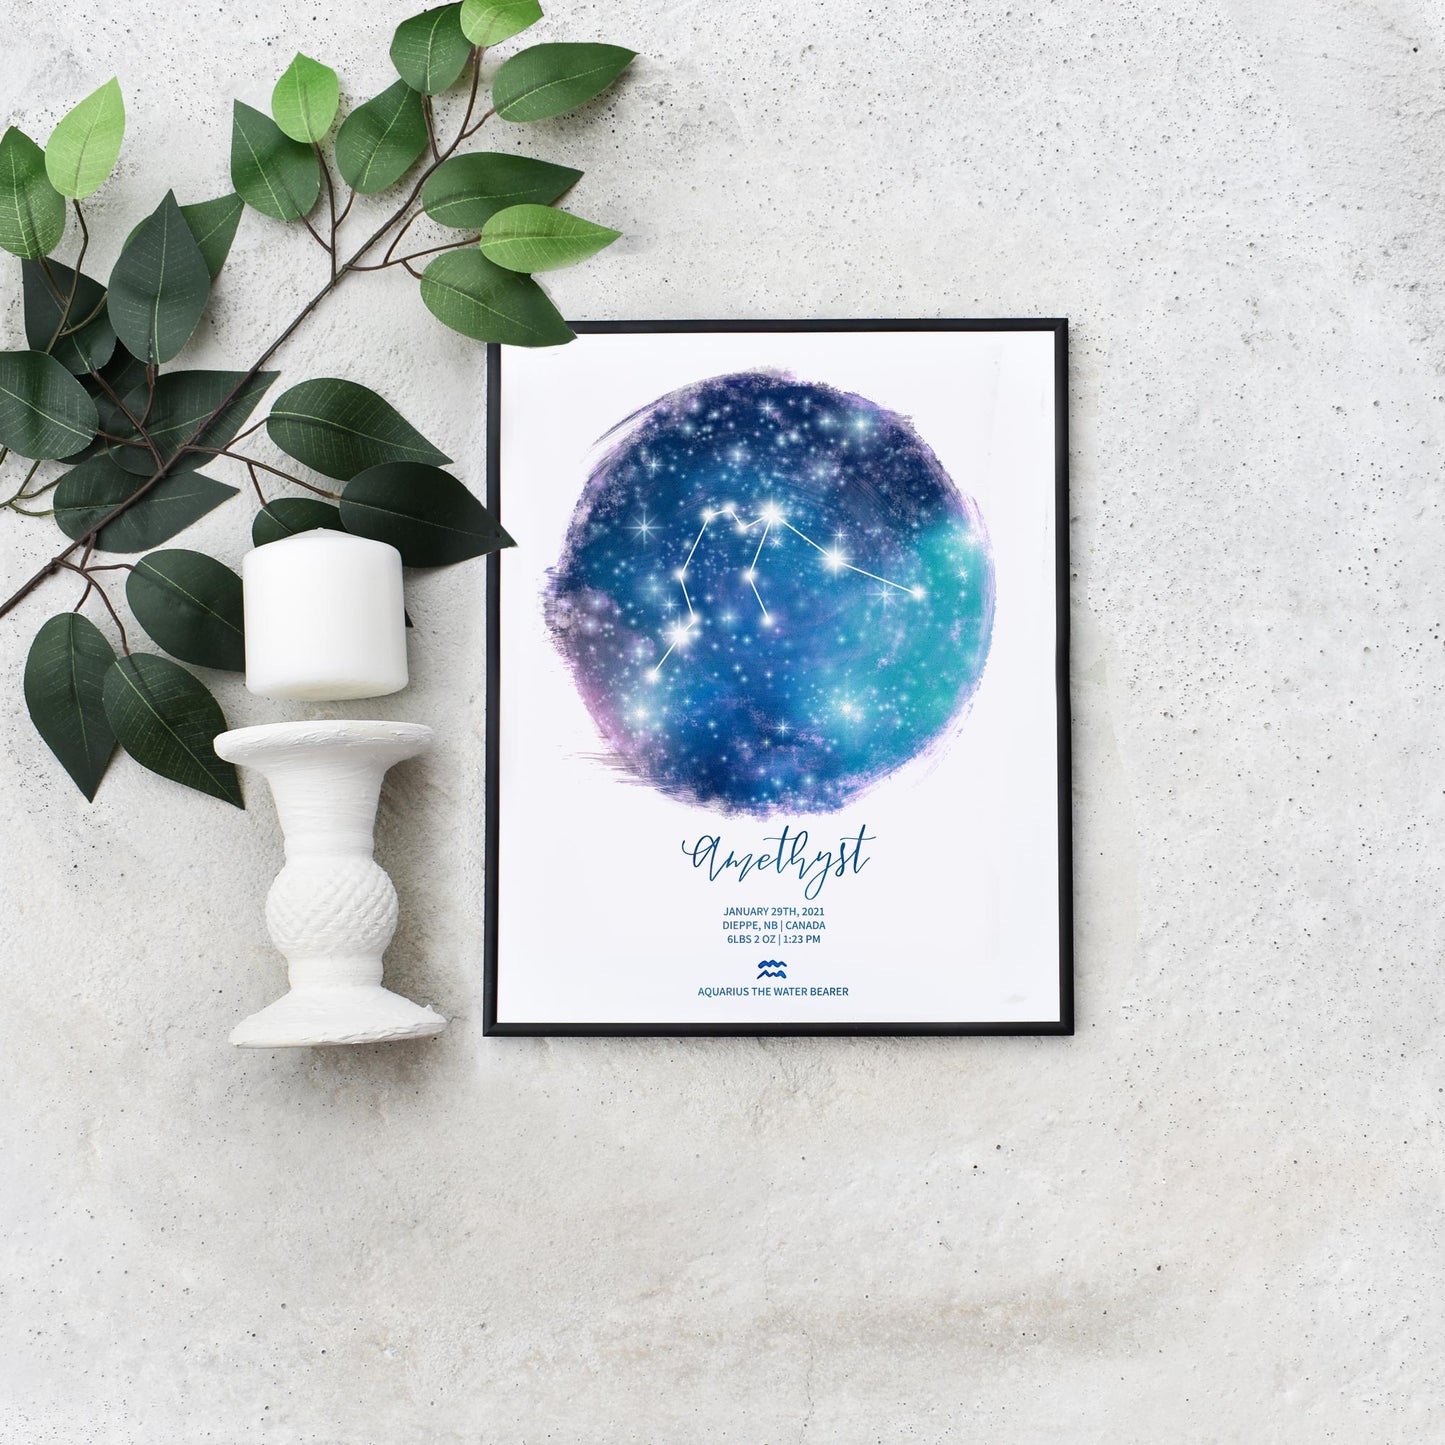 Editable Aquarius Birth Star Sign Template Personalized Astrology Gifts for Baby Shower